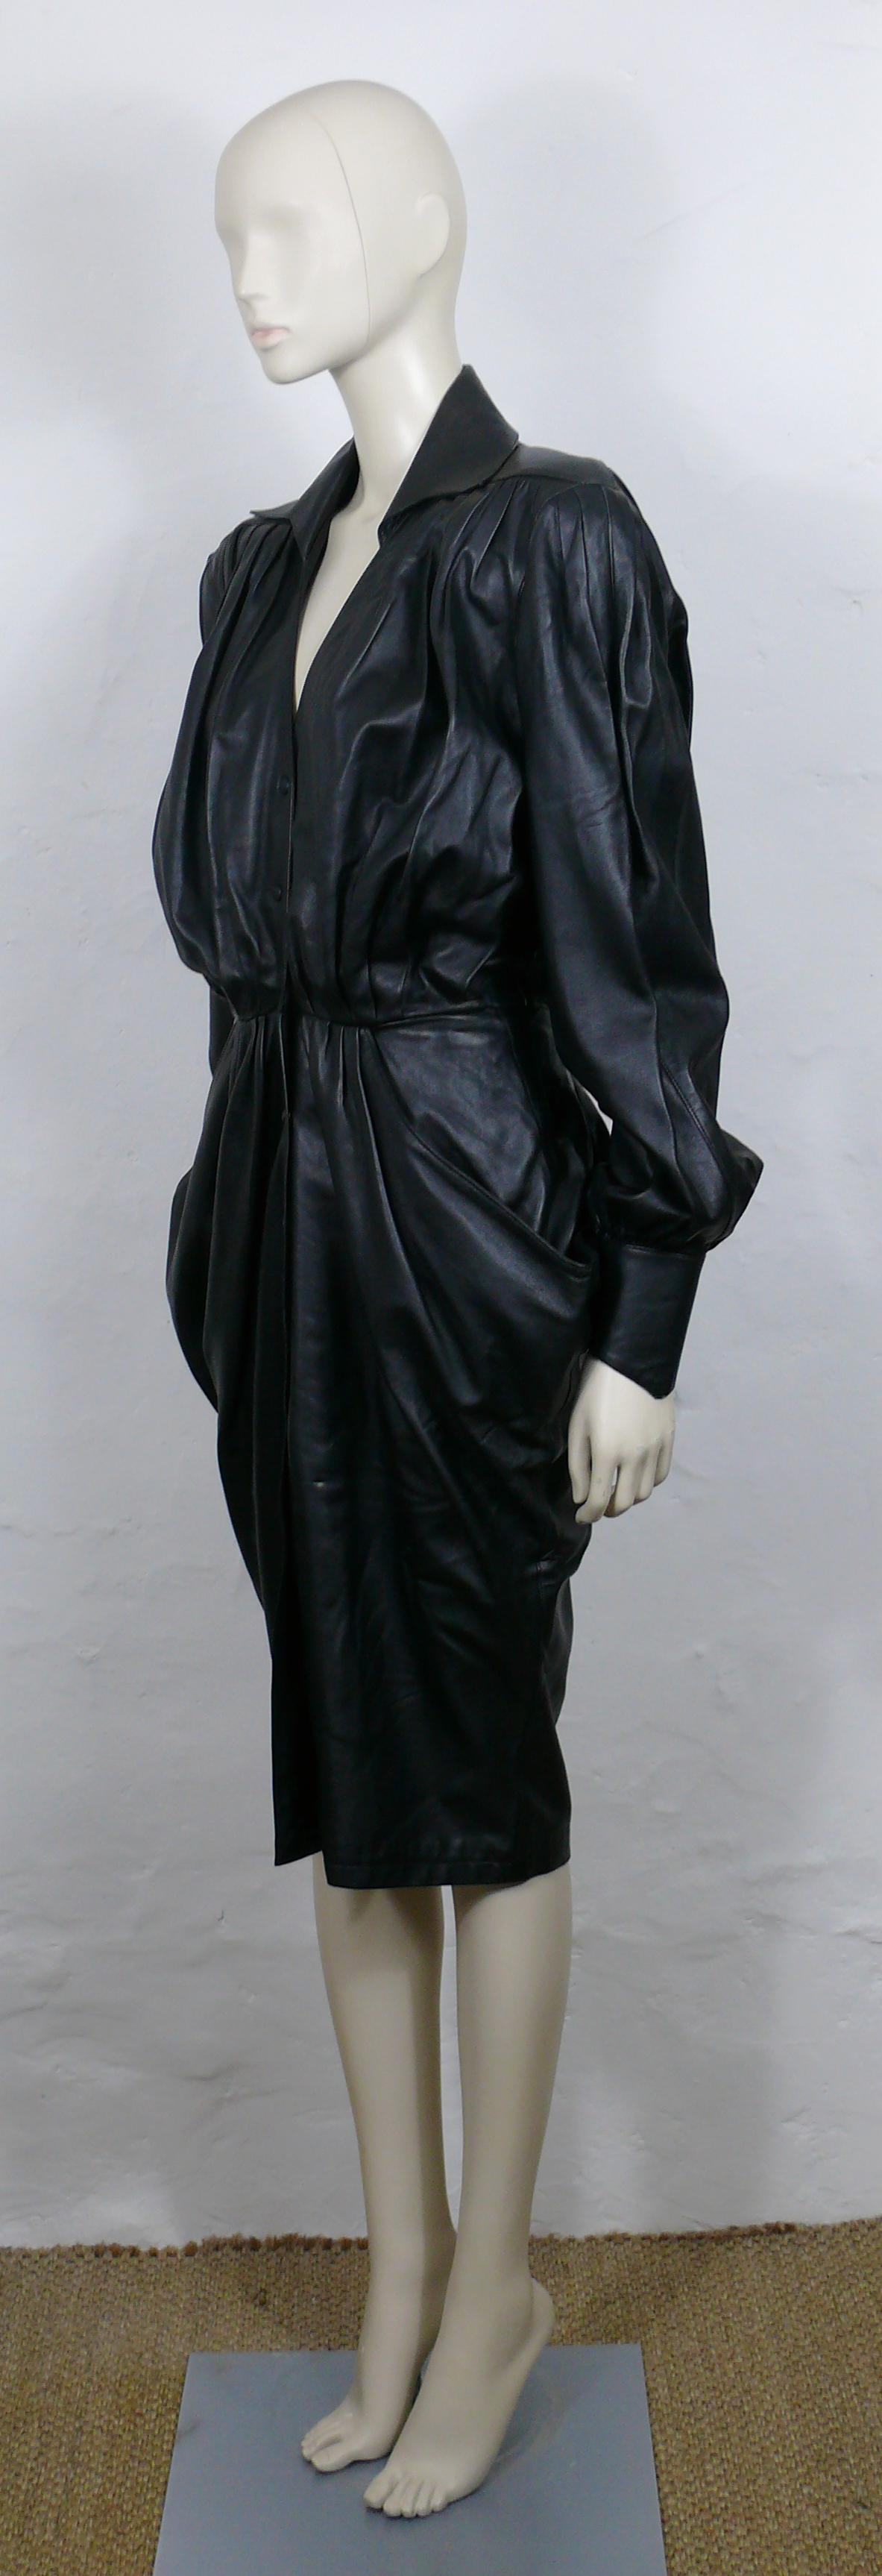 Women's THIERRY MUGLER Vintage Black Leather Dress For Sale